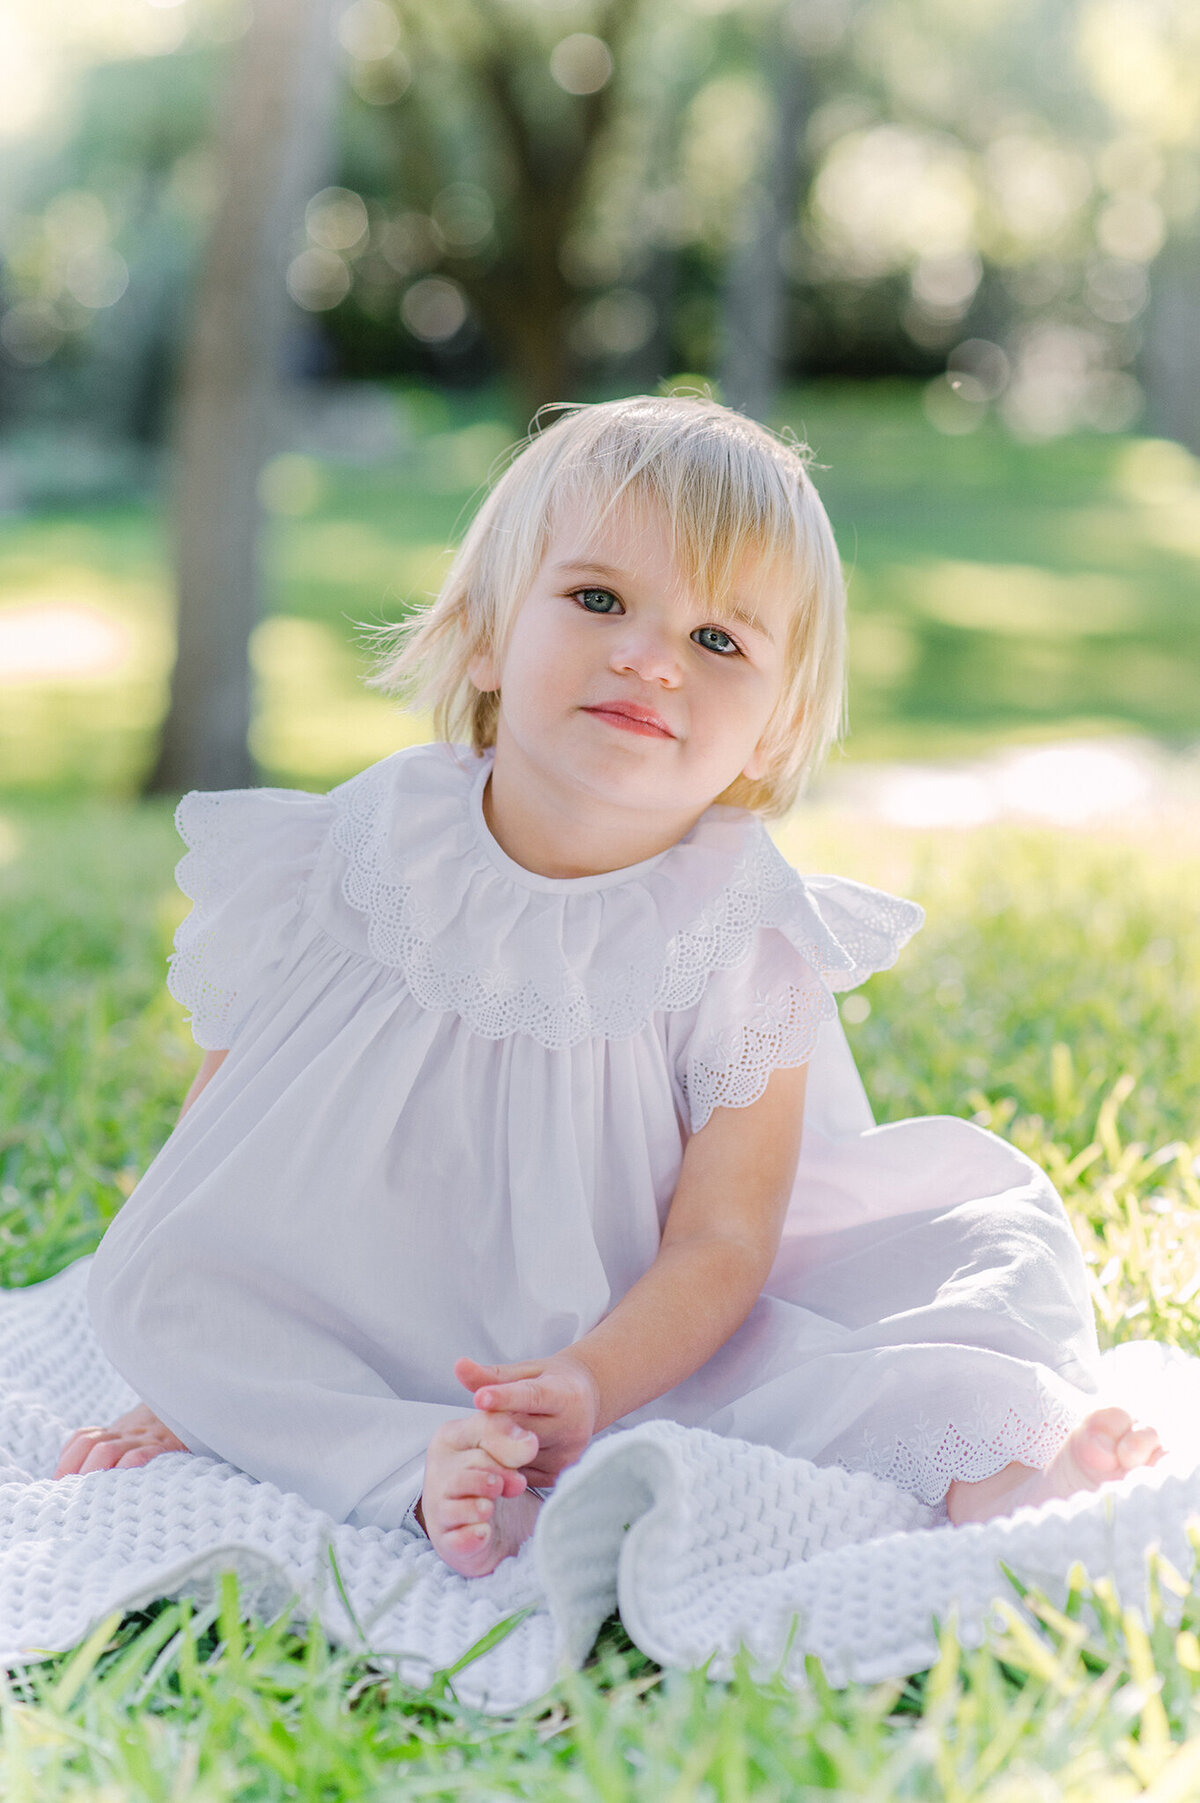 Blonde toddler sitting on a white blanket wearing a white dress in a park.